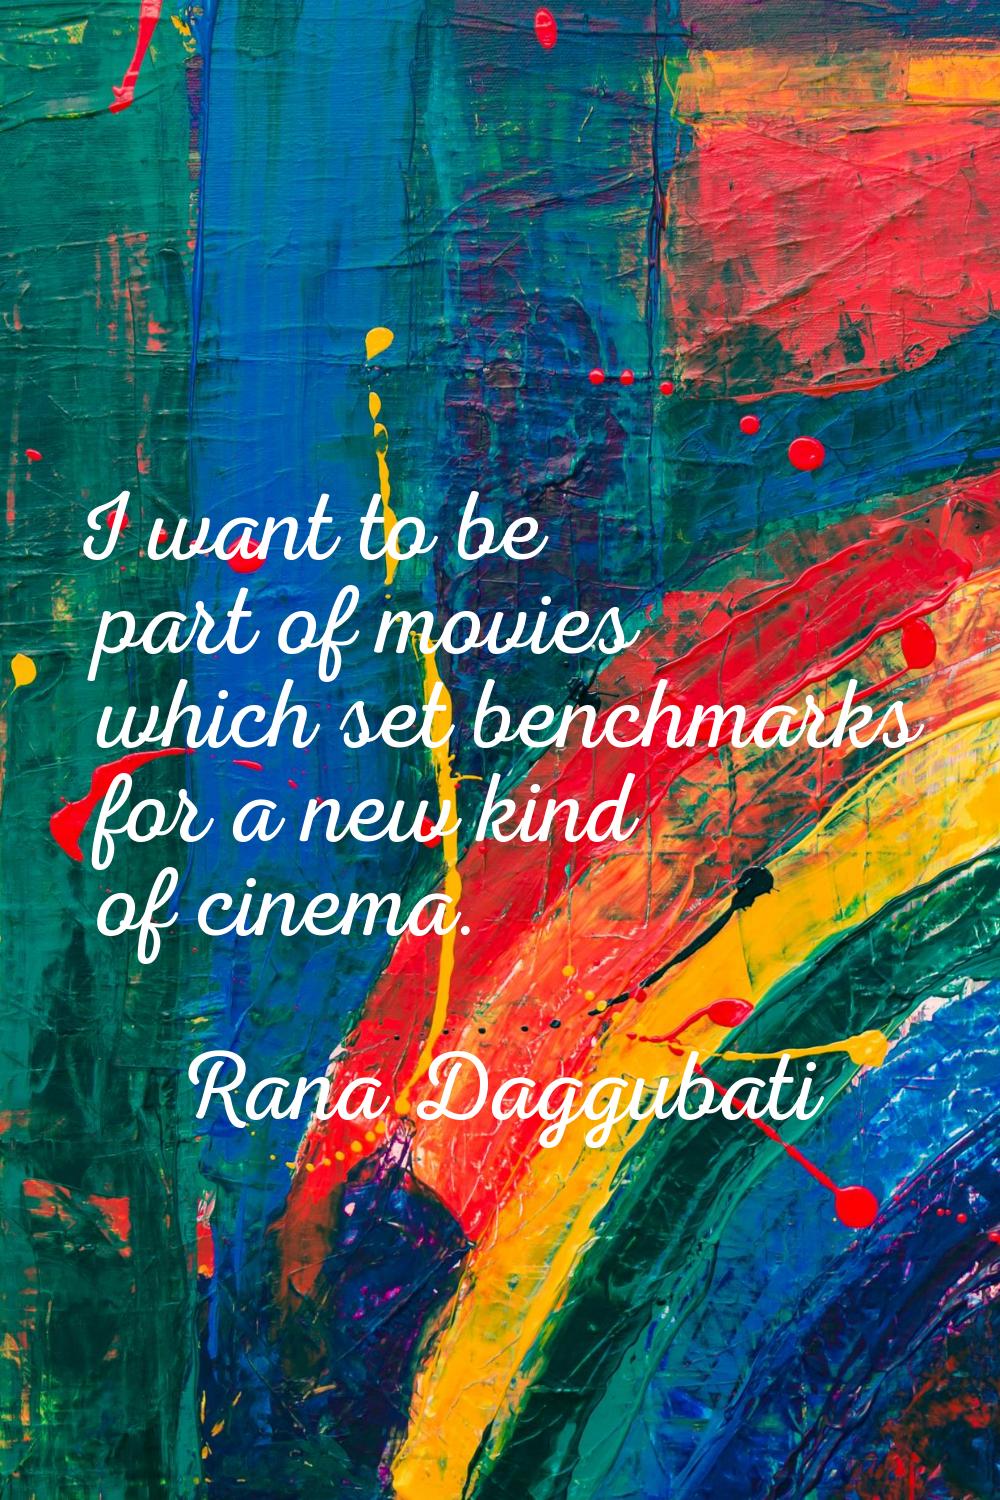 I want to be part of movies which set benchmarks for a new kind of cinema.